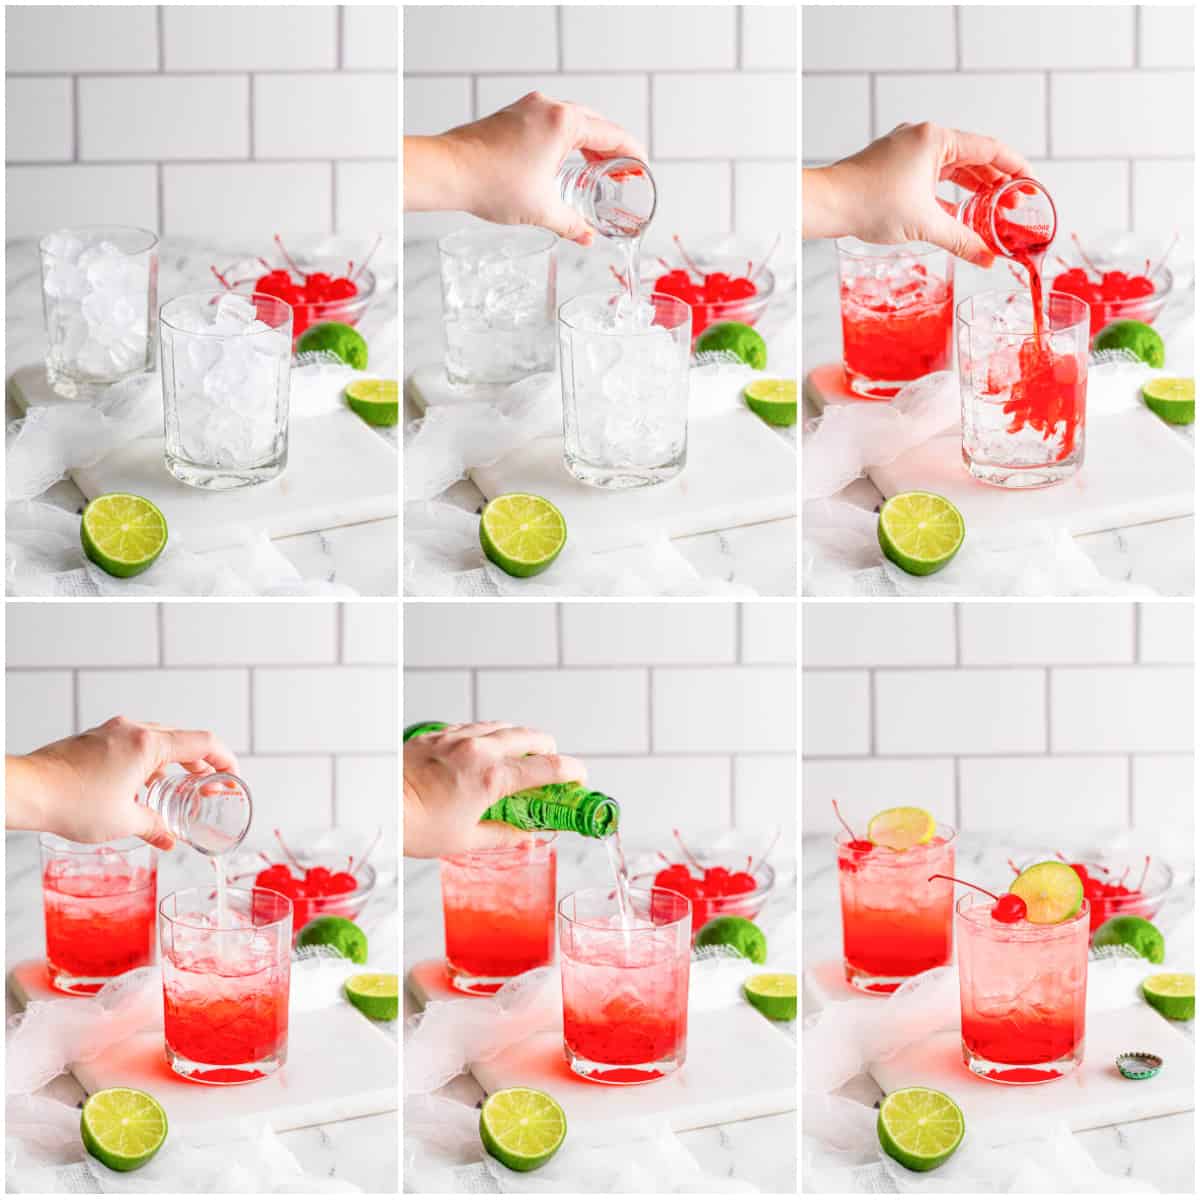 Step by step photos on how to make a Dirty Shirley.